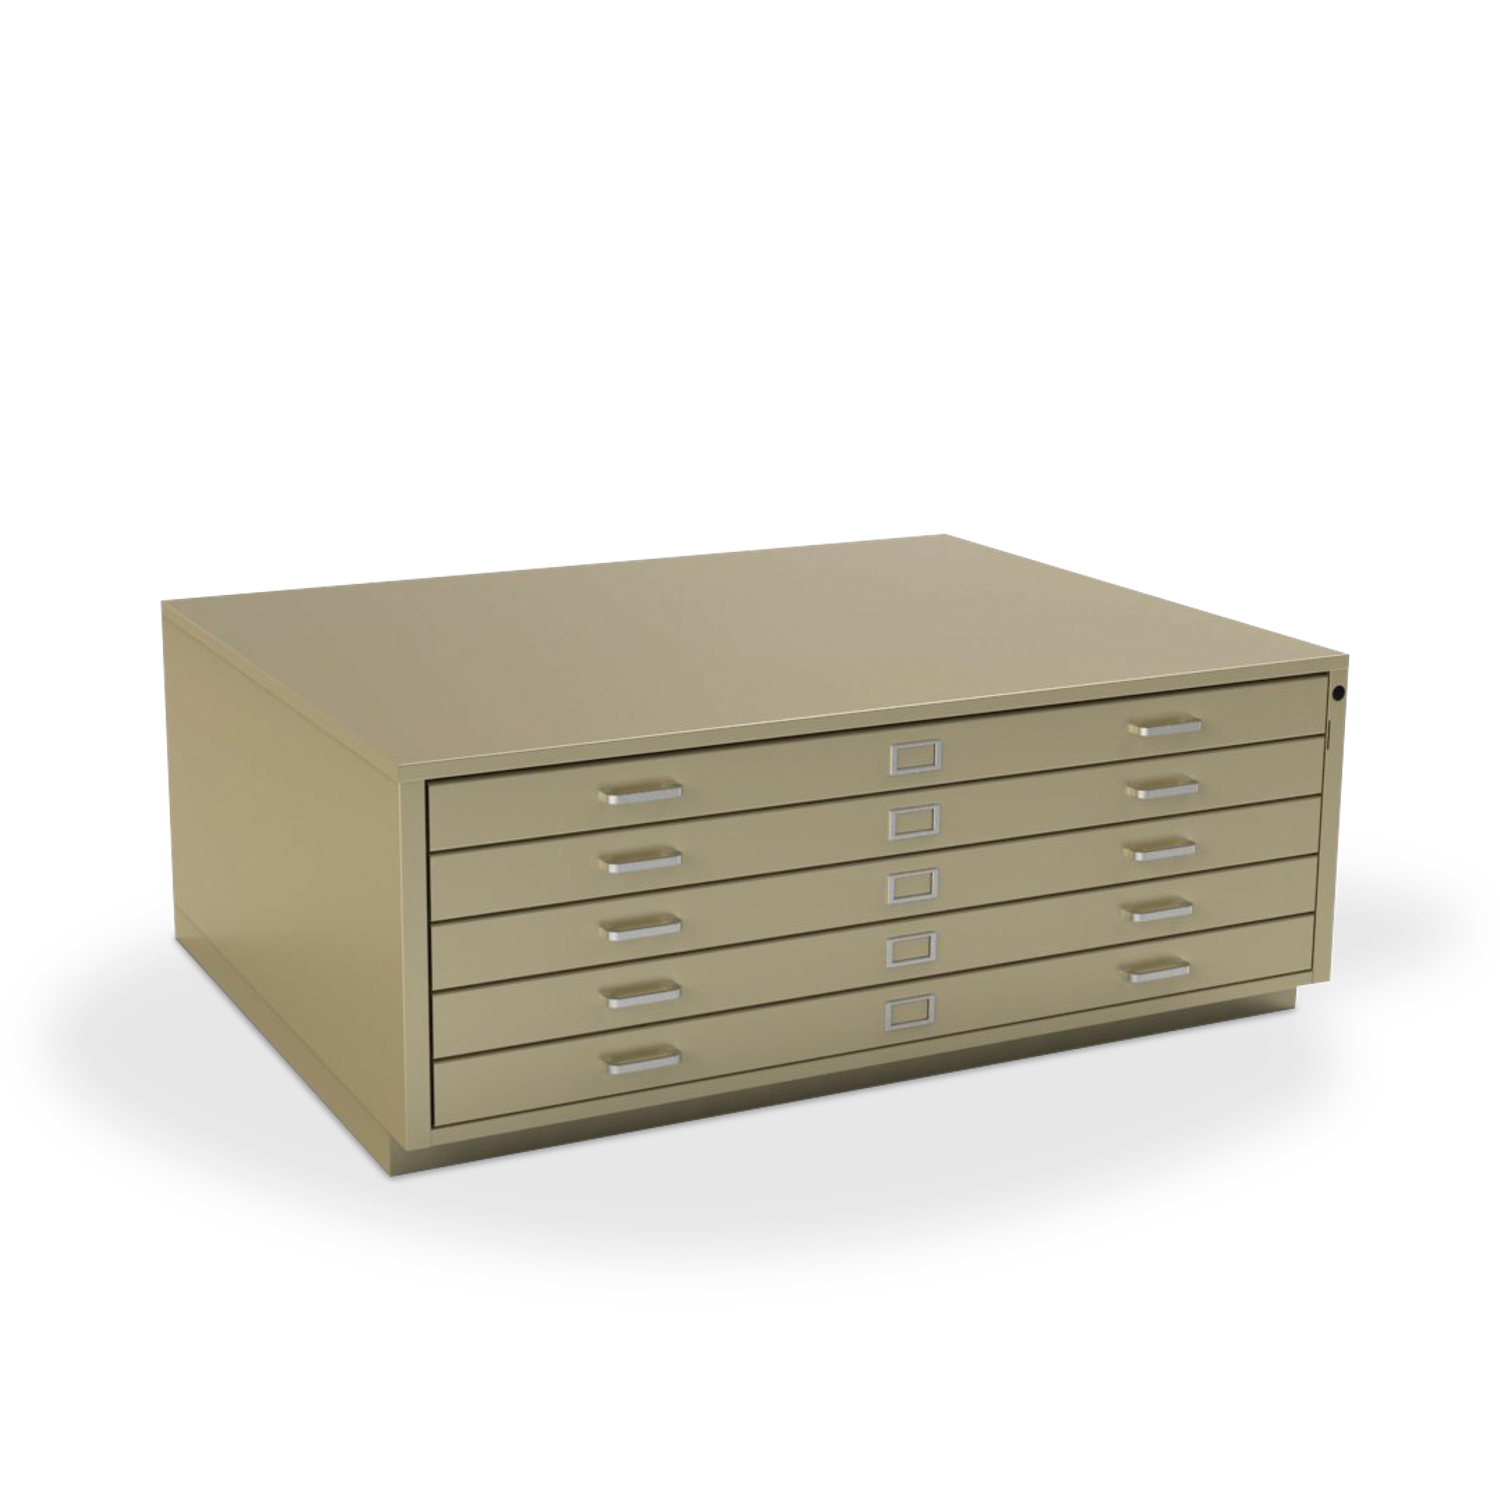 What is a Flat File?